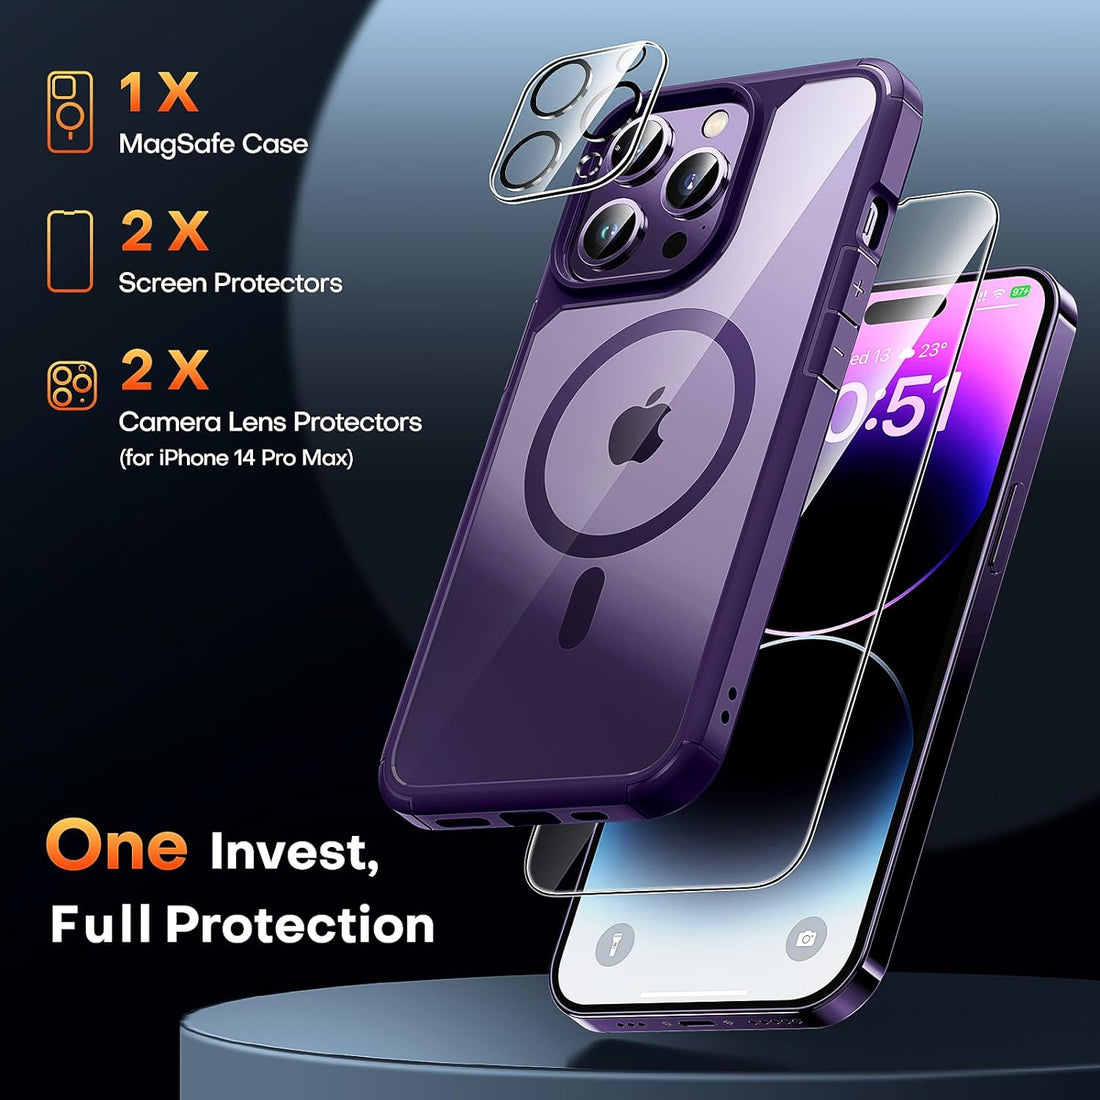 TAURI Magnetic Clear Case for iPhone 14 Pro Max [Military Shockproof] [Designed for MagSafe] Slim Cover 6.7 inch, Purple